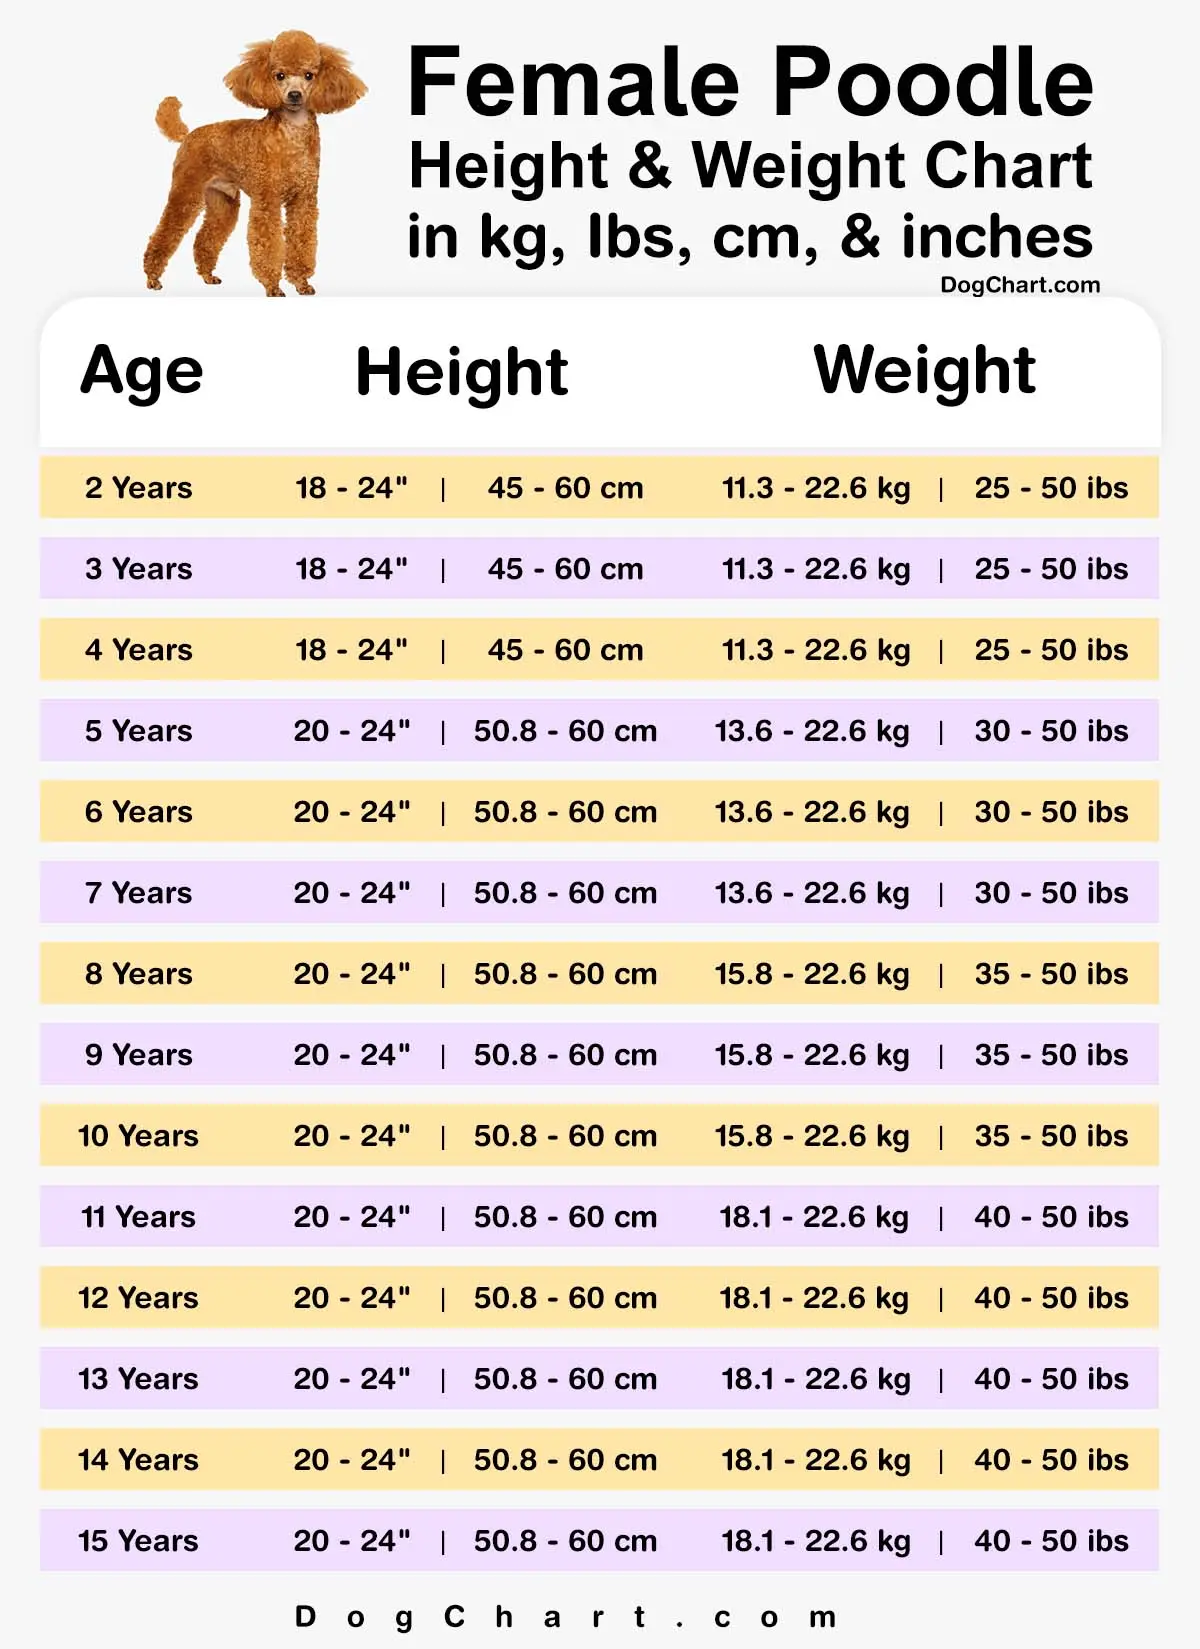 Female poodle Height and weight chart by age in kg, Ibs, cm, & inches